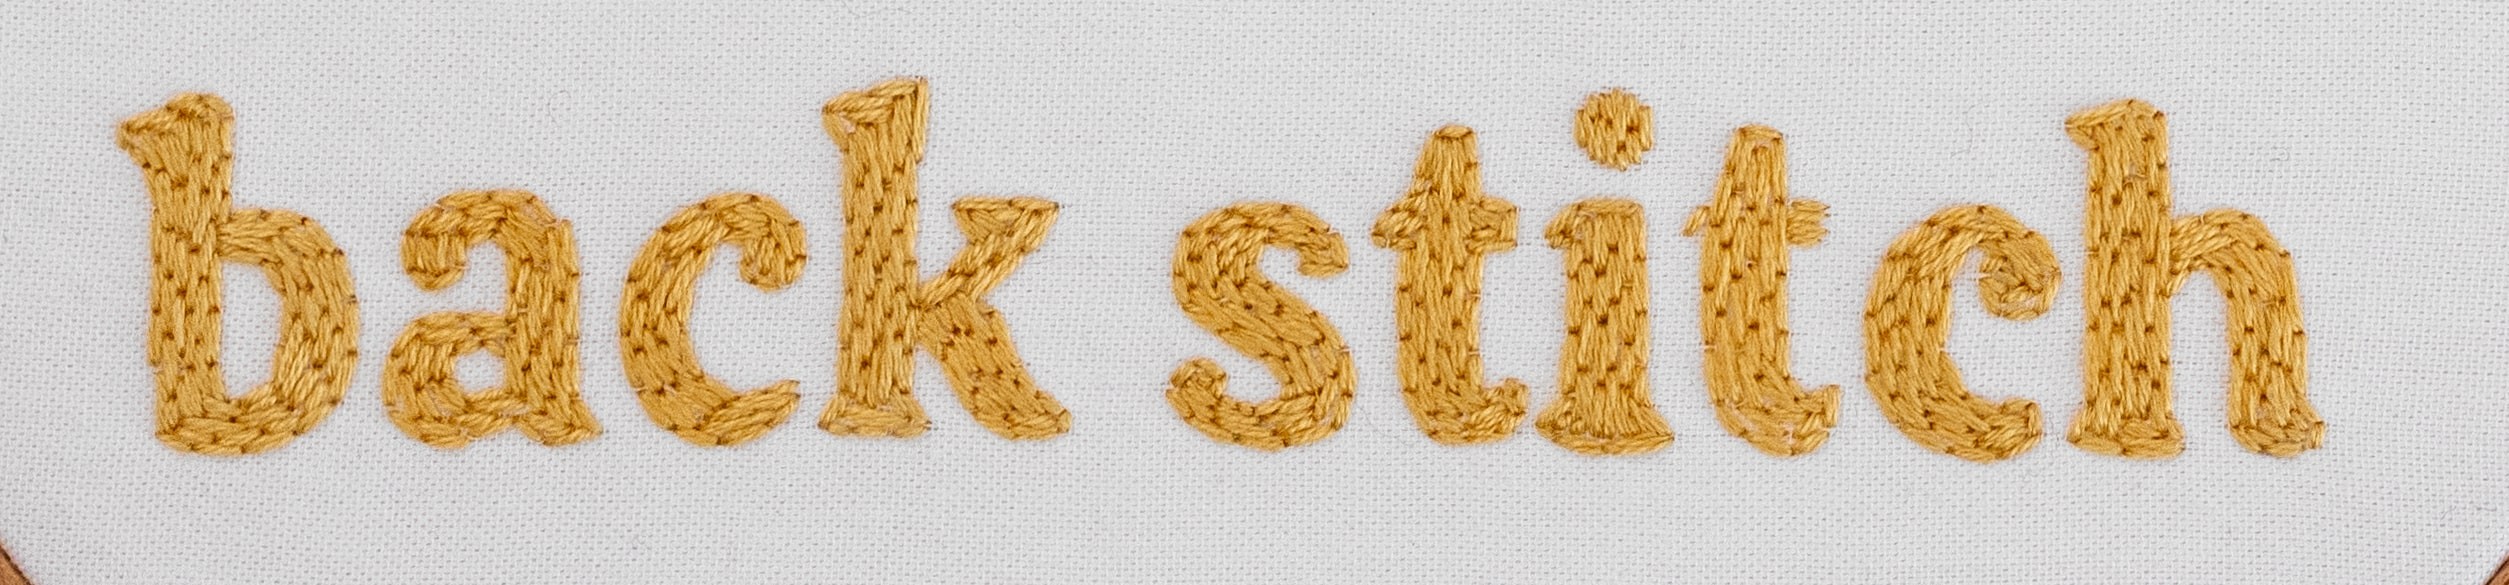 This image is of a word using modern embroidery back stitch.